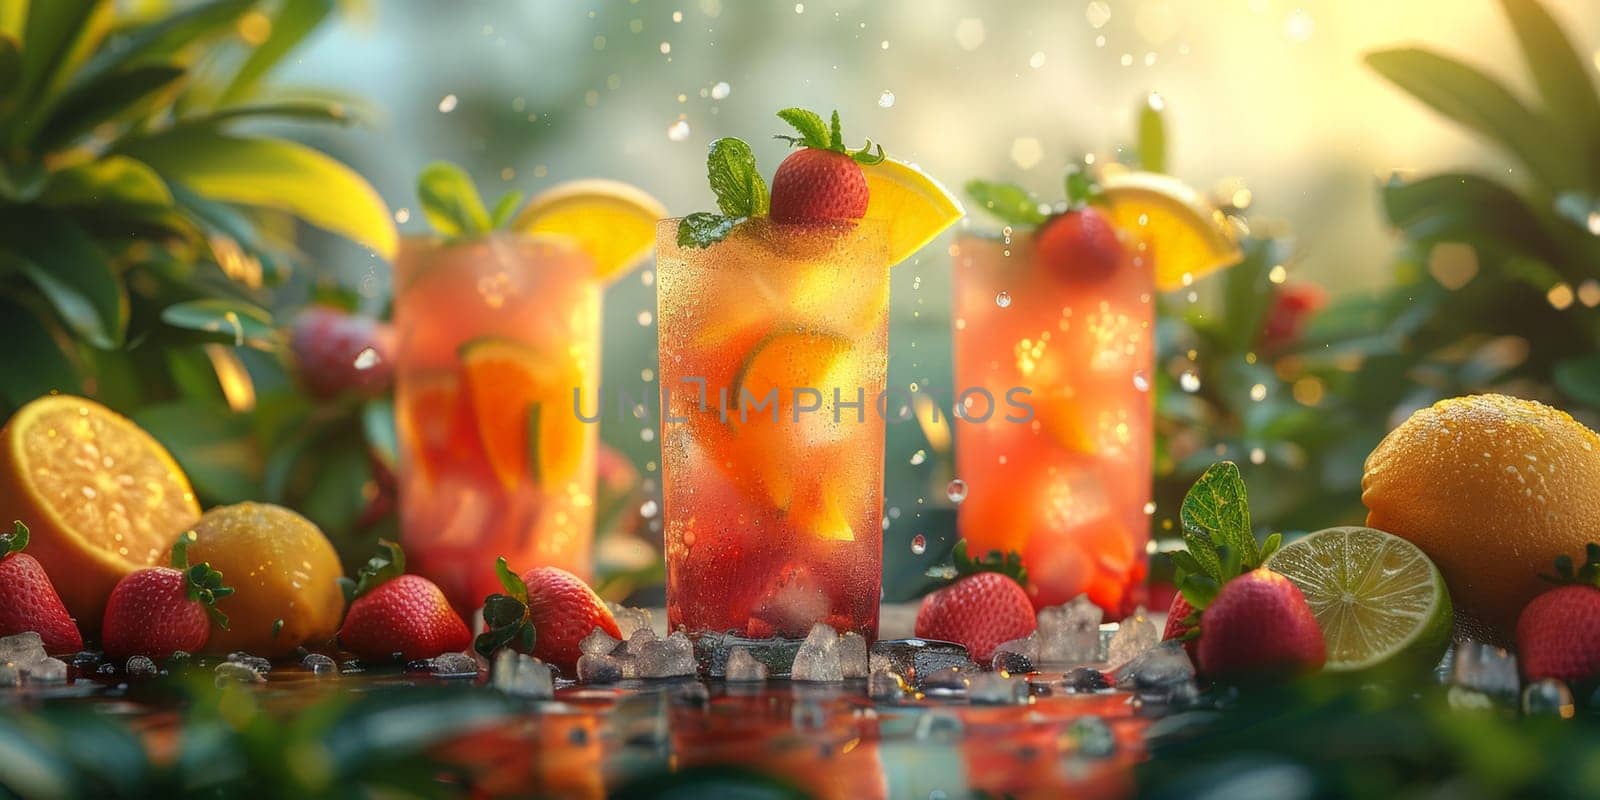 A colorful drink with strawberries, oranges, and limes is displayed on a table by nateemee